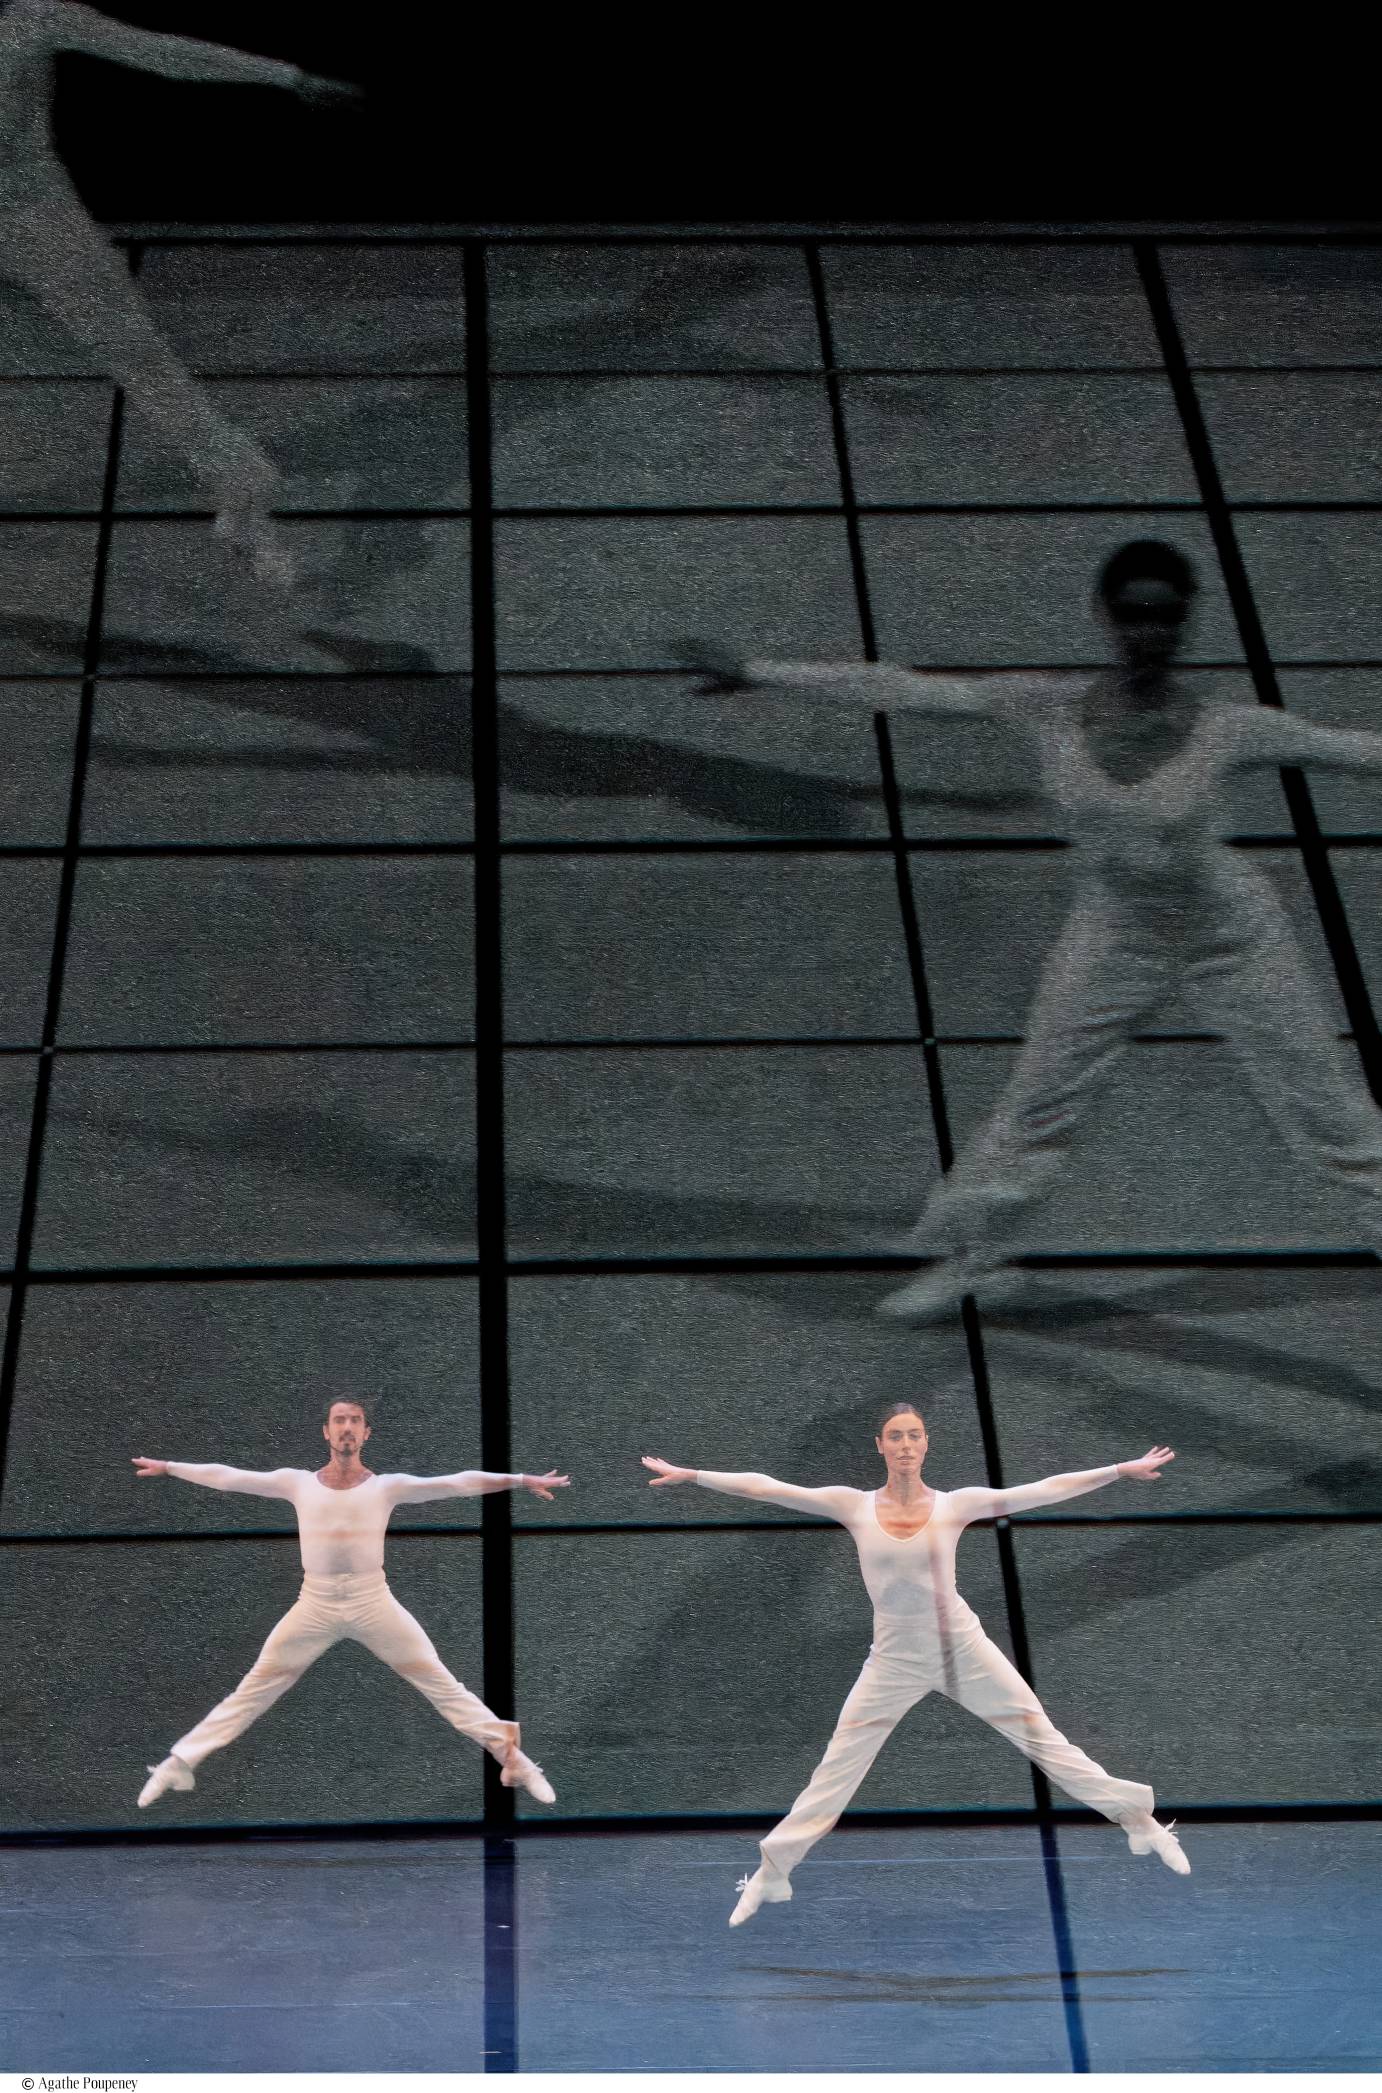 Pair of white, long-sleeved unitard dancers facing downstage, jumping in a wide second position, arms horizontal. Their larger-than-life images are projected simultaneously.